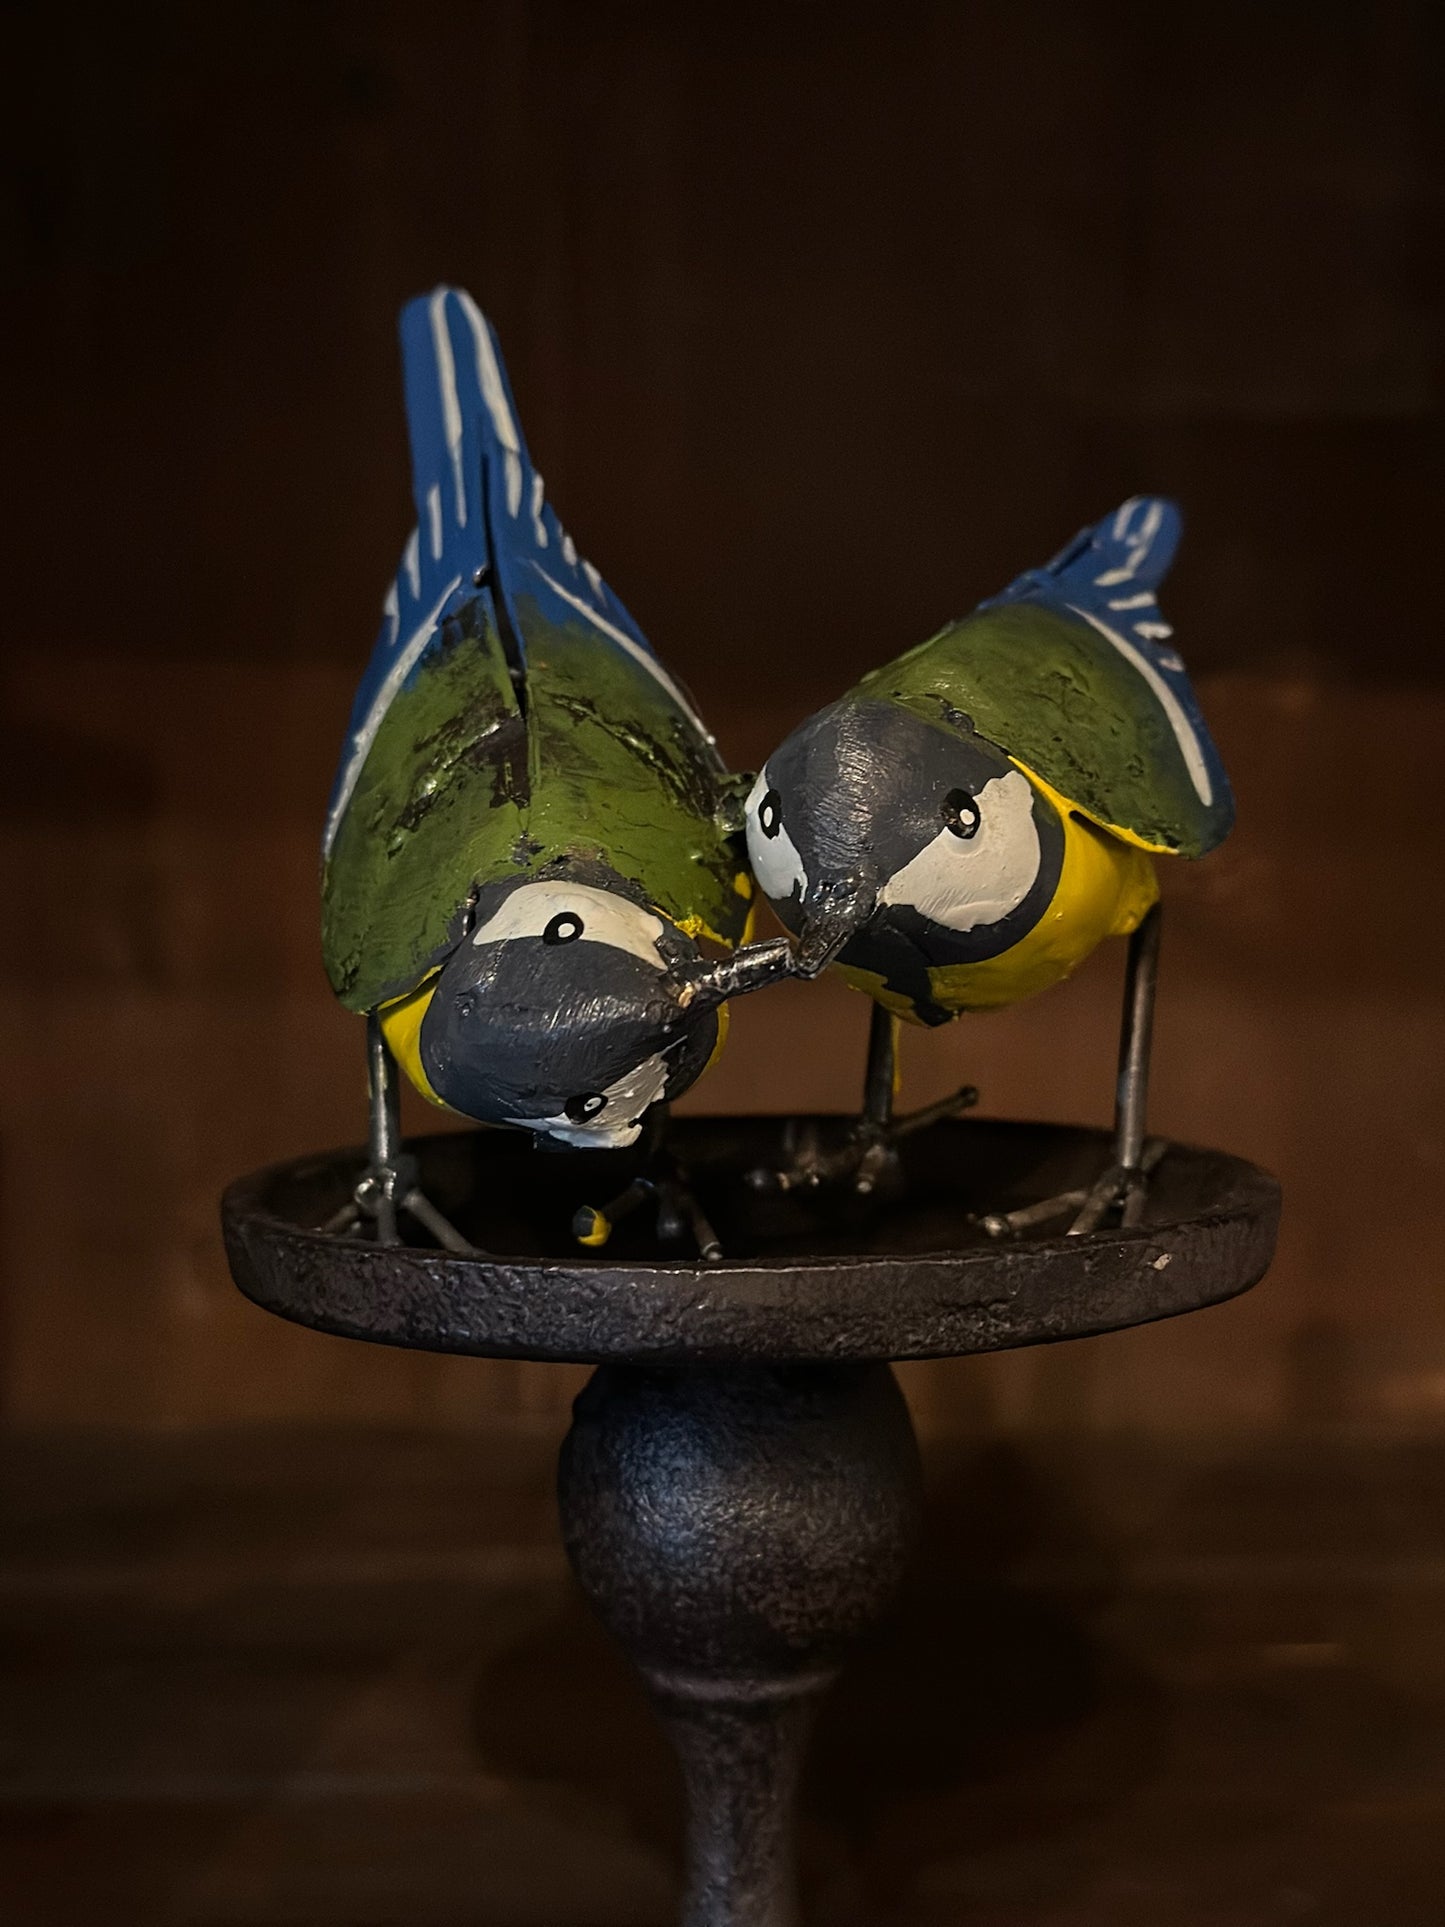 Great Tits (Cinciallegre) Kissing In Recycled Metal